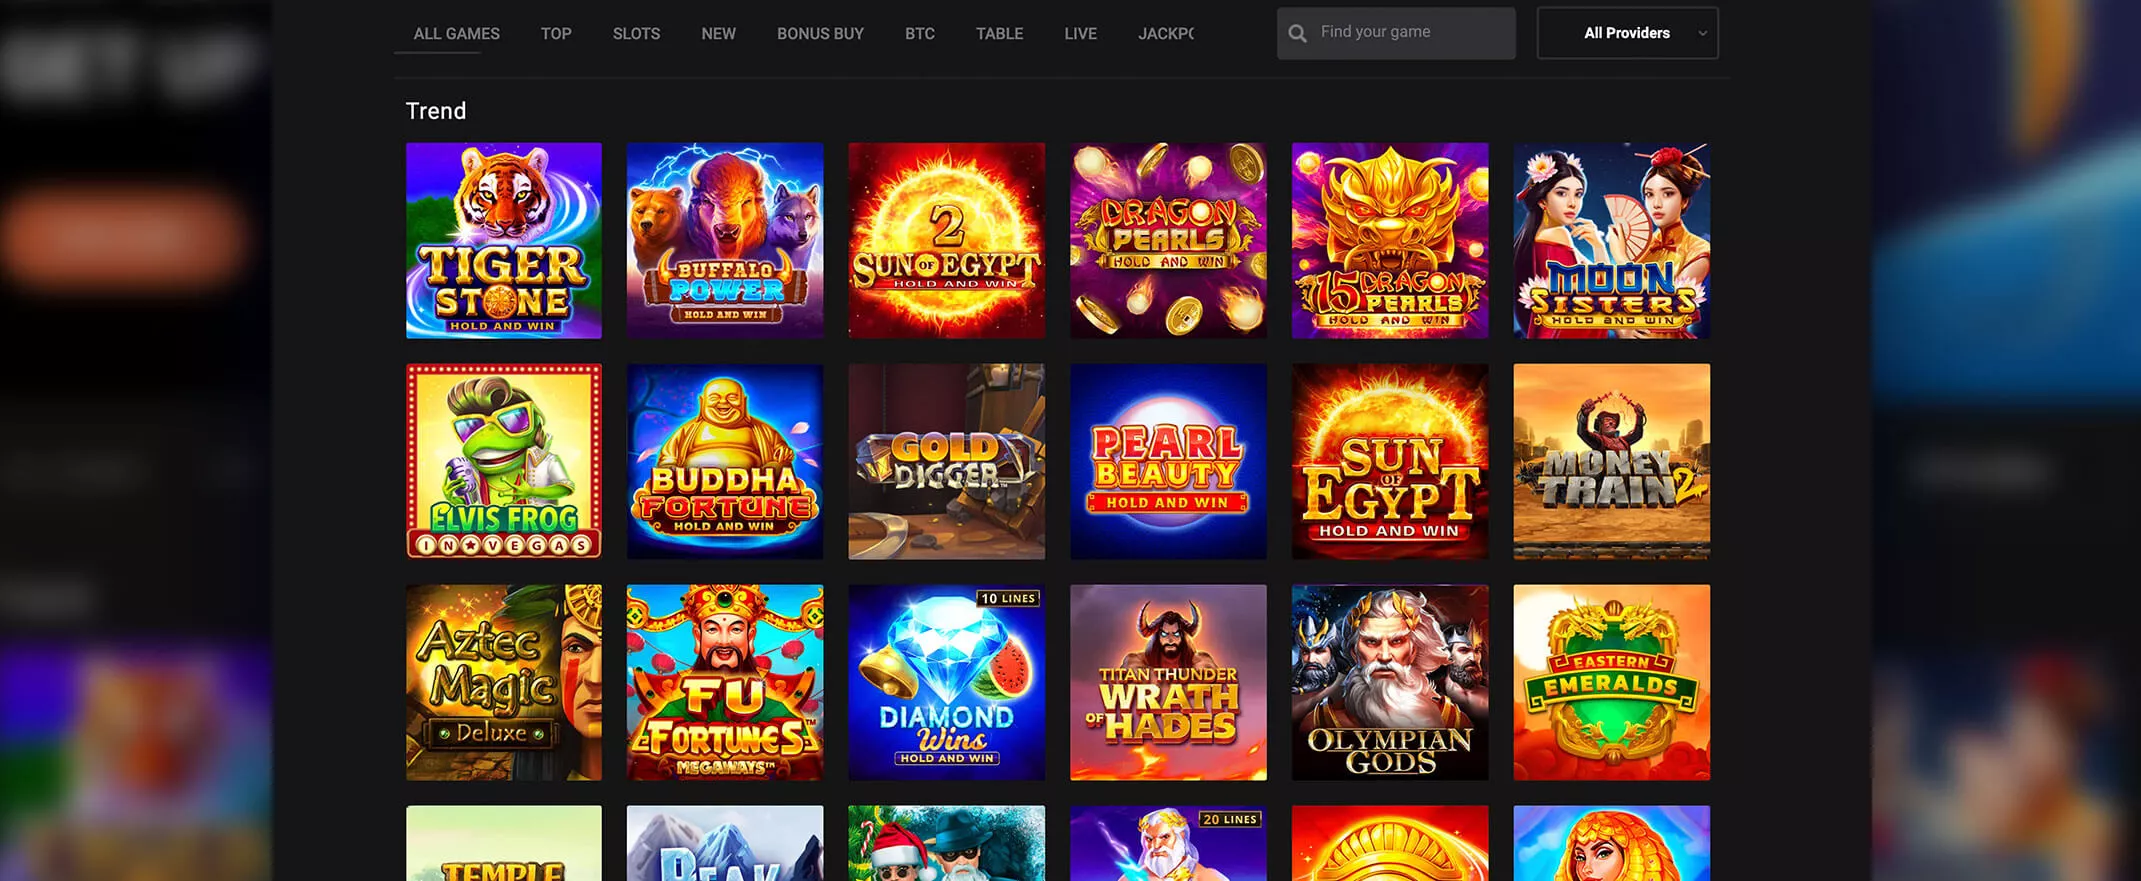 Level Up Casino screenshot of the games page